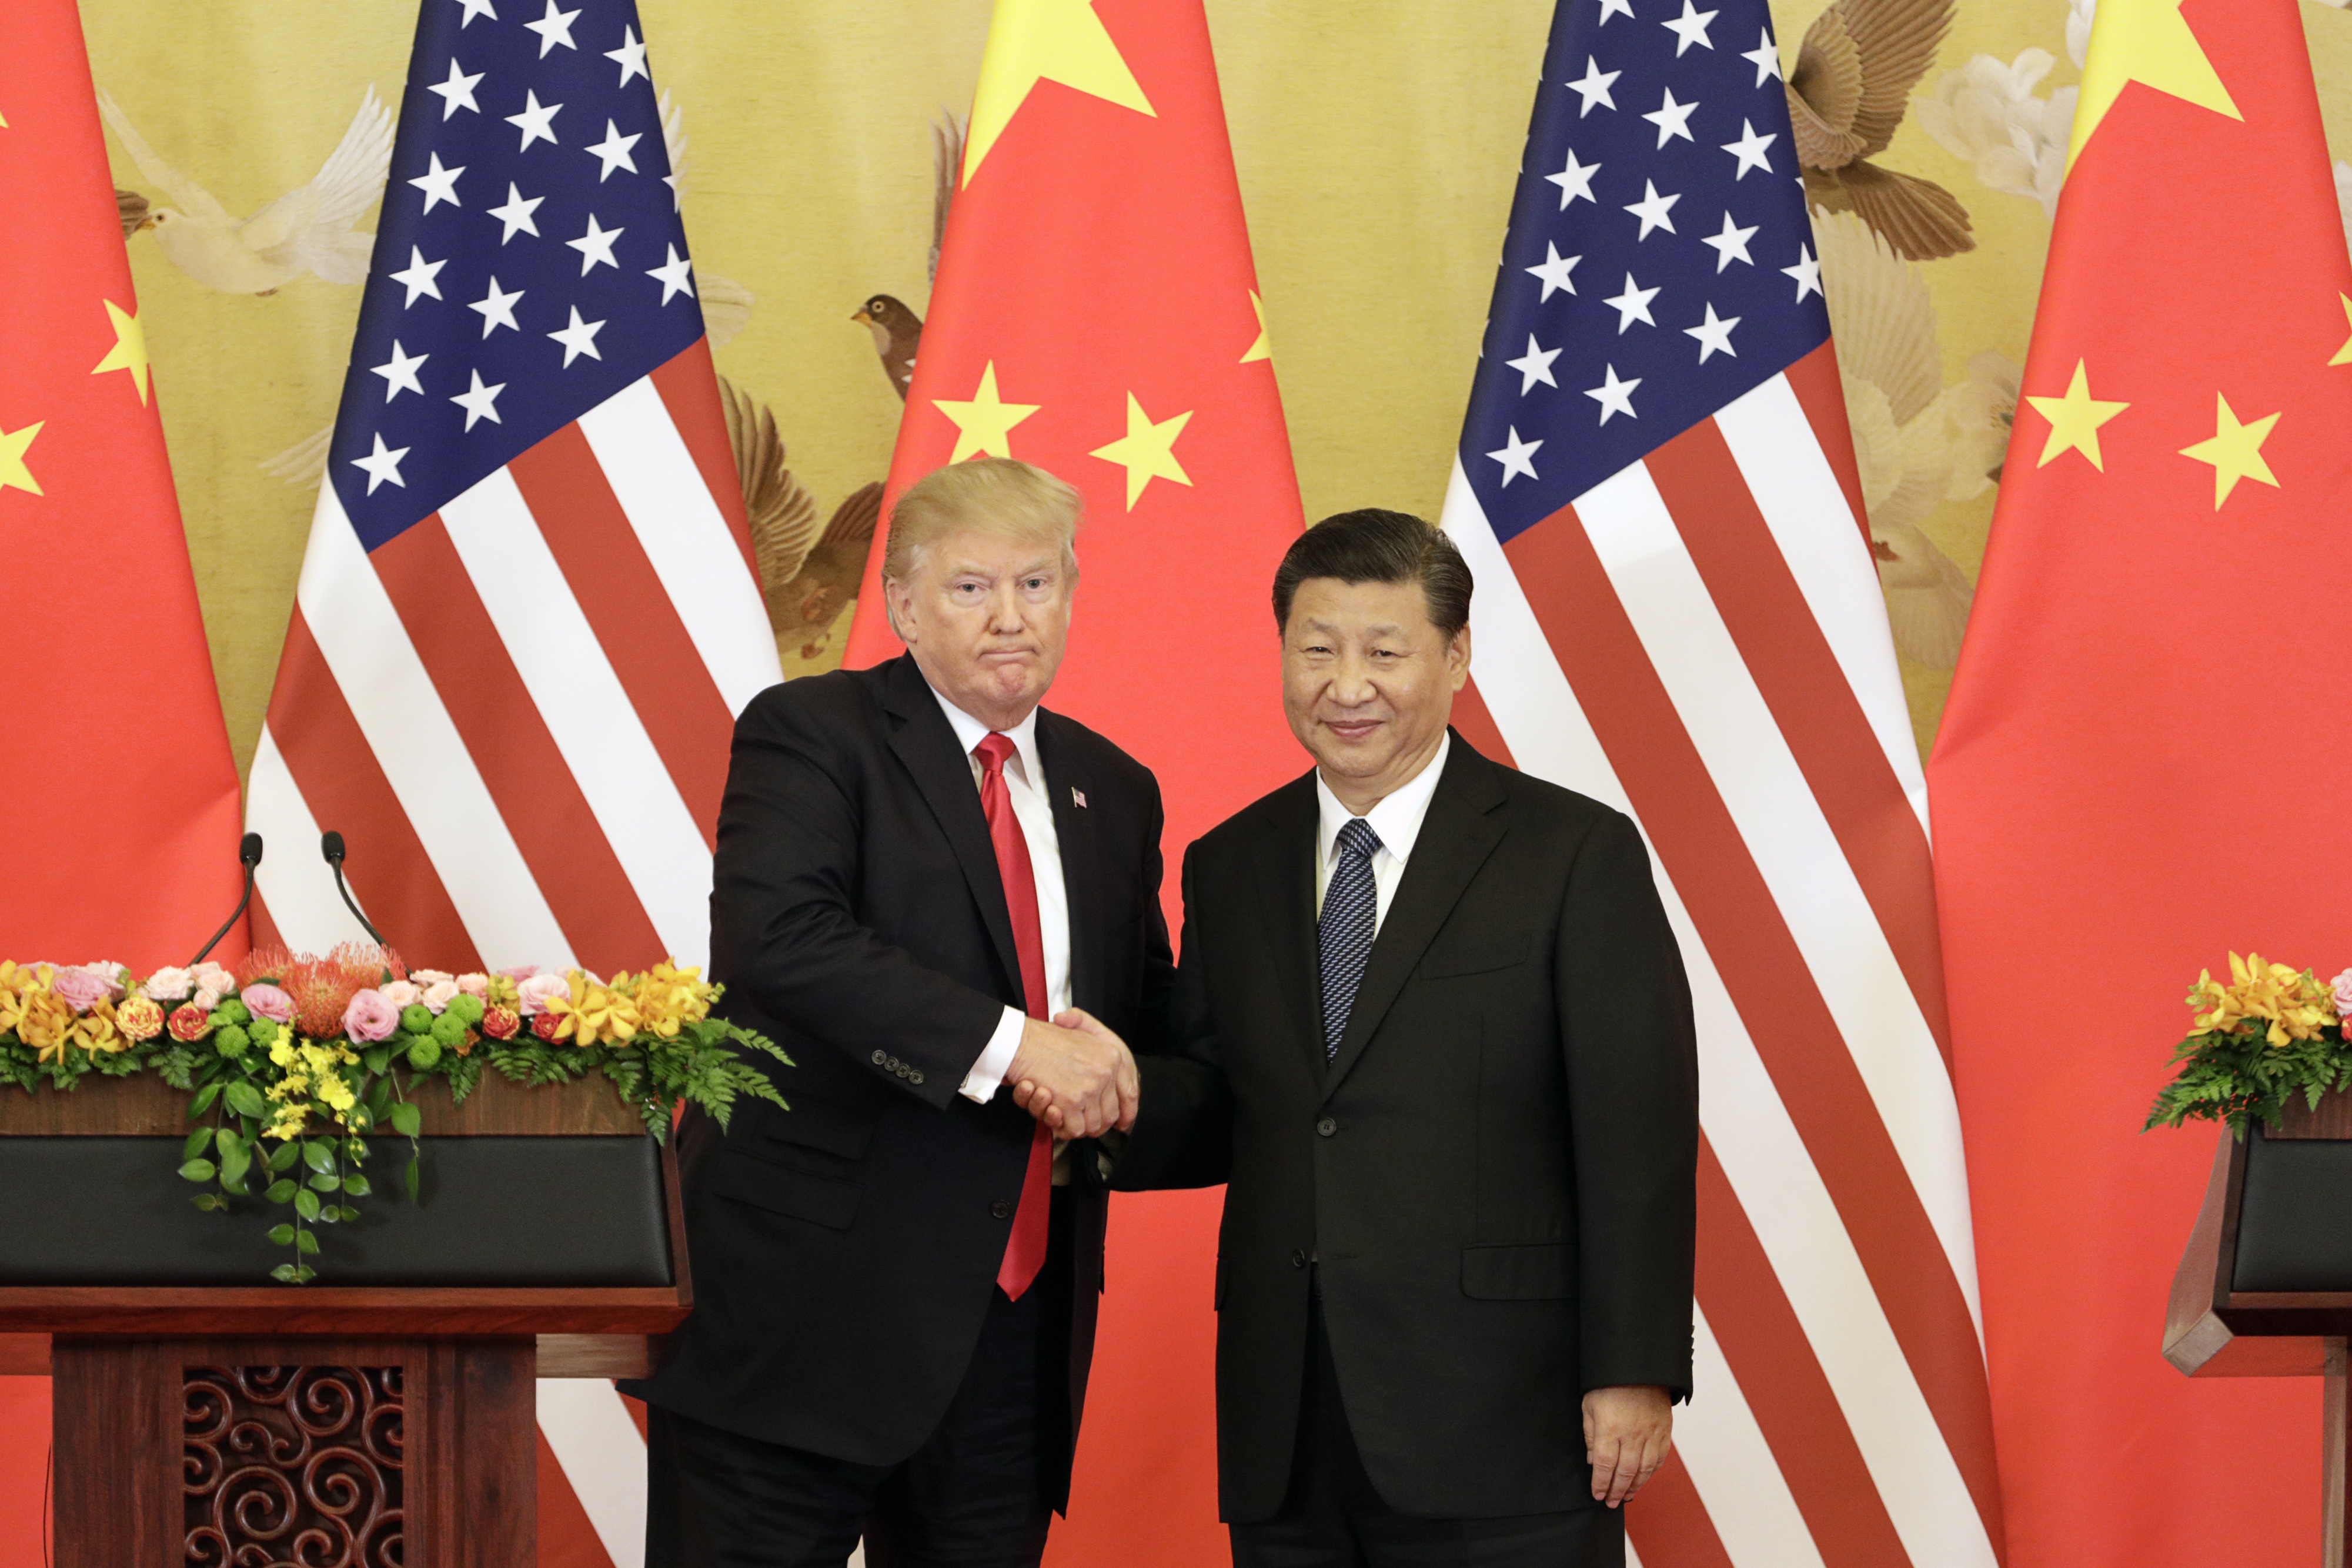 U.S. President Donald Trump, left, and Xi Jinping, China's president, shake hands during a news conference at the Great Hall of the People in Beijing, China, on Thursday, Nov. 9, 2017 (Bloomberg—Bloomberg via Getty Images)